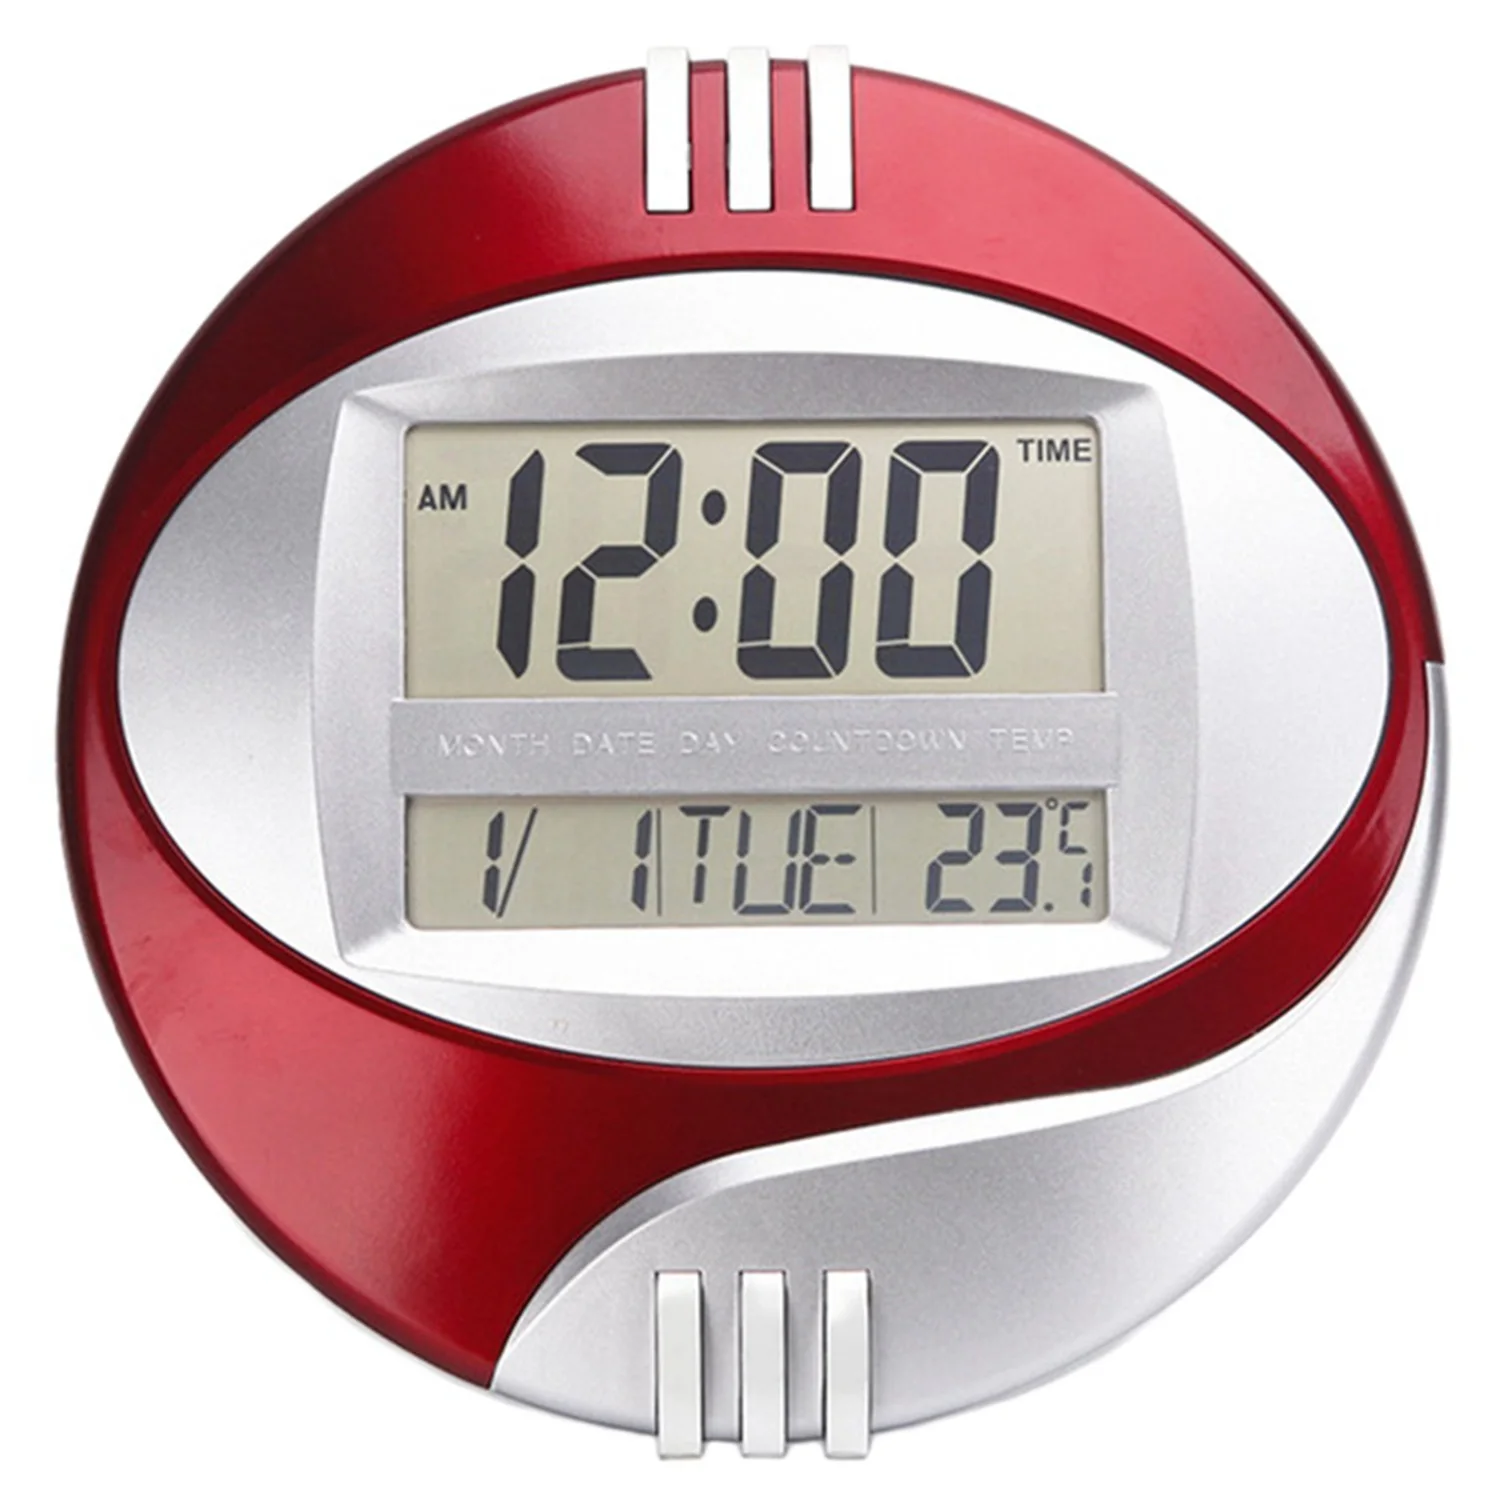 

Temperature Display Digital Wall Electronic Clock LCD Moderne Calendar LED Bracket Watch Mute Of Home Office Decoration Red